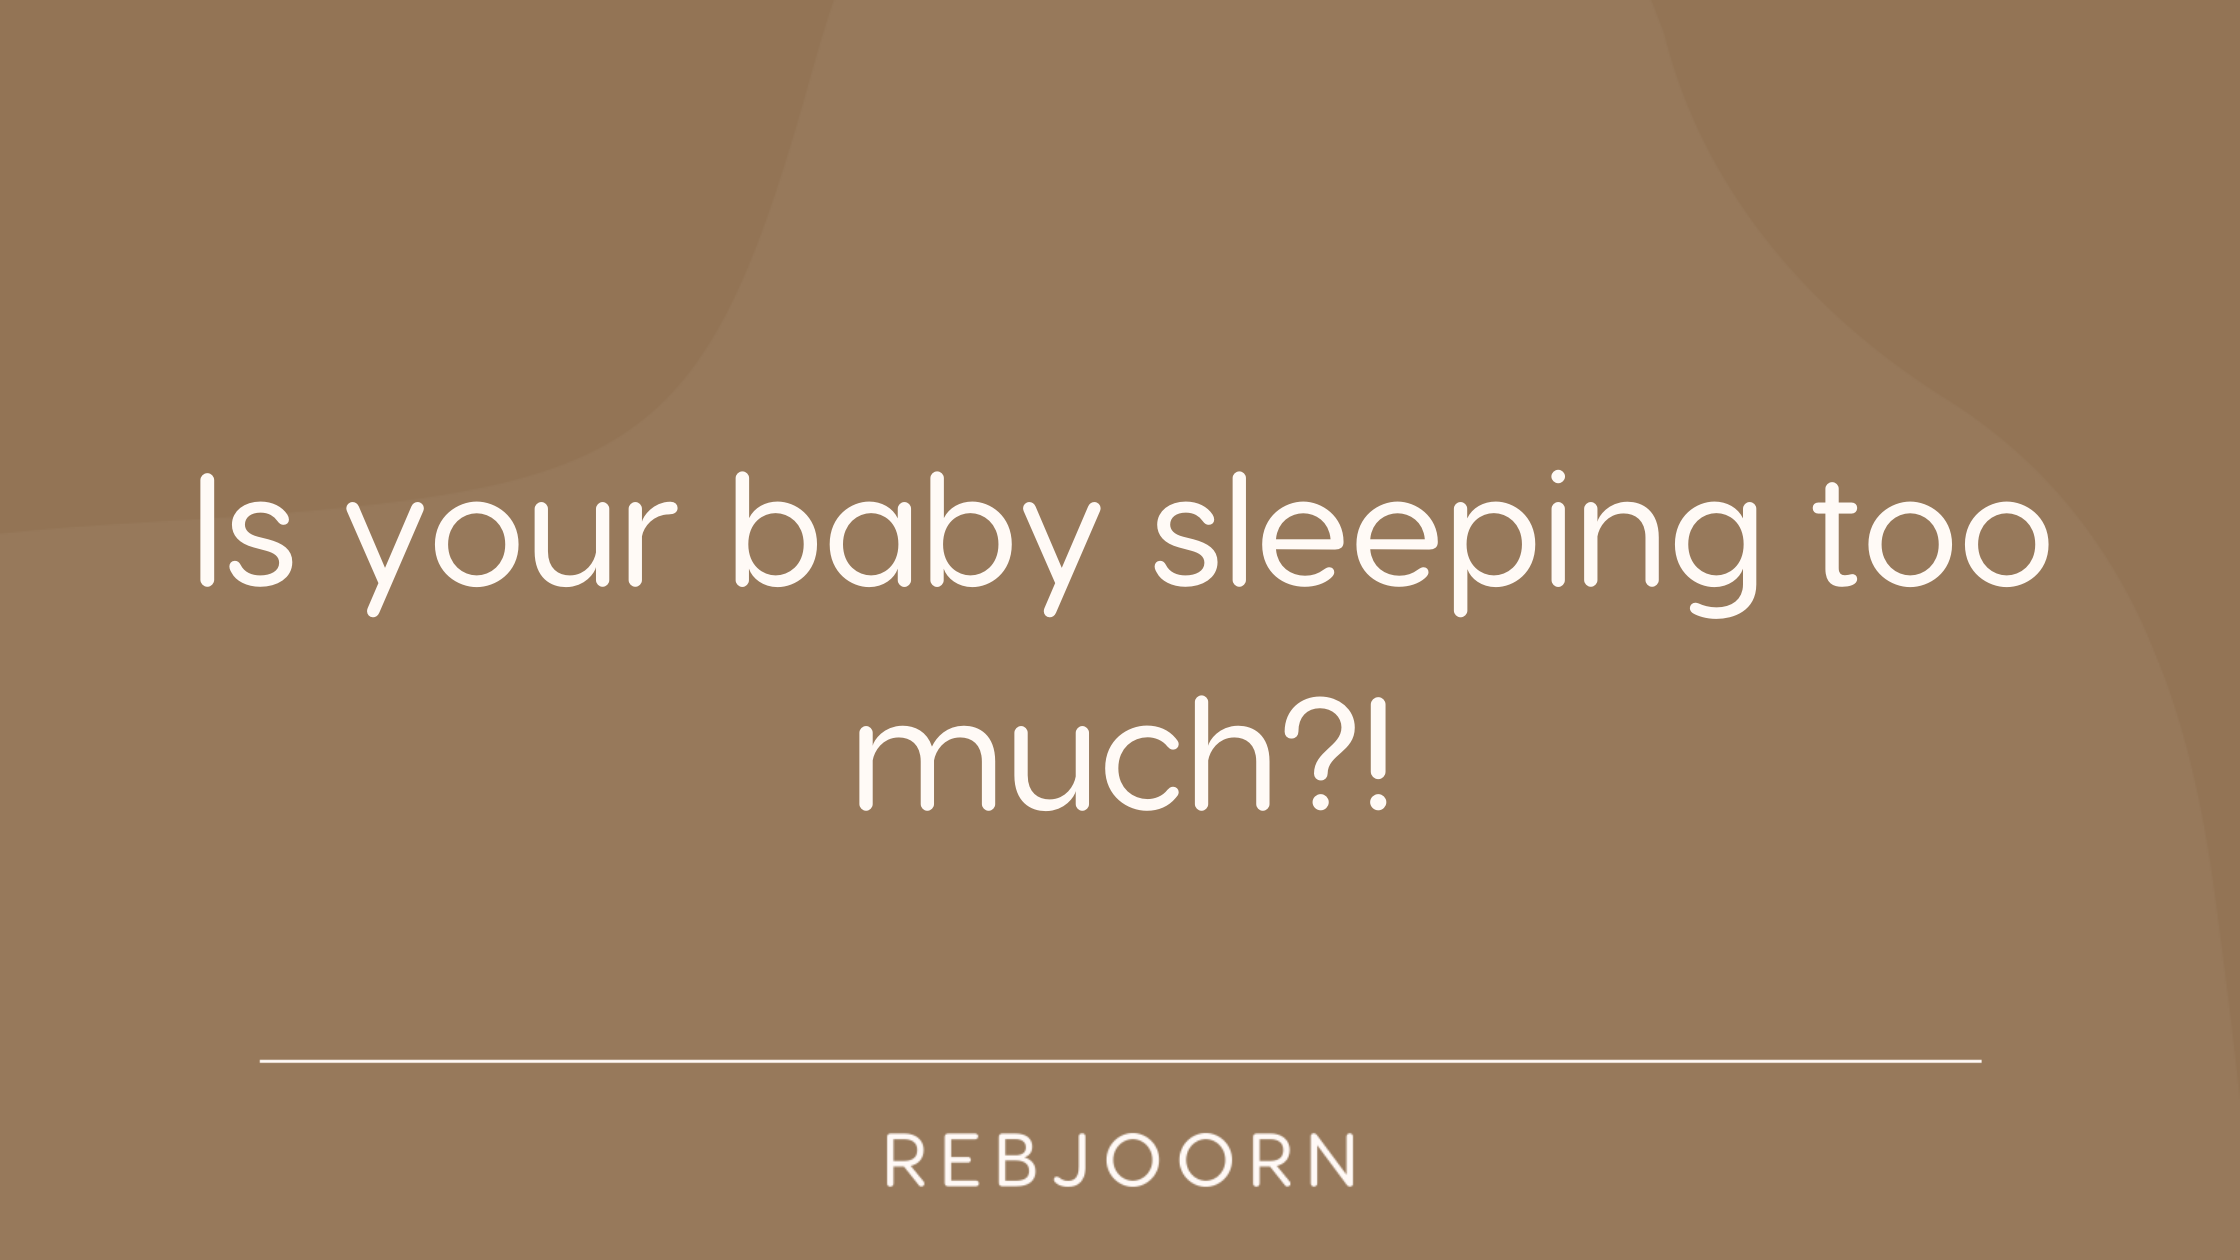 Is your baby sleeping too much?